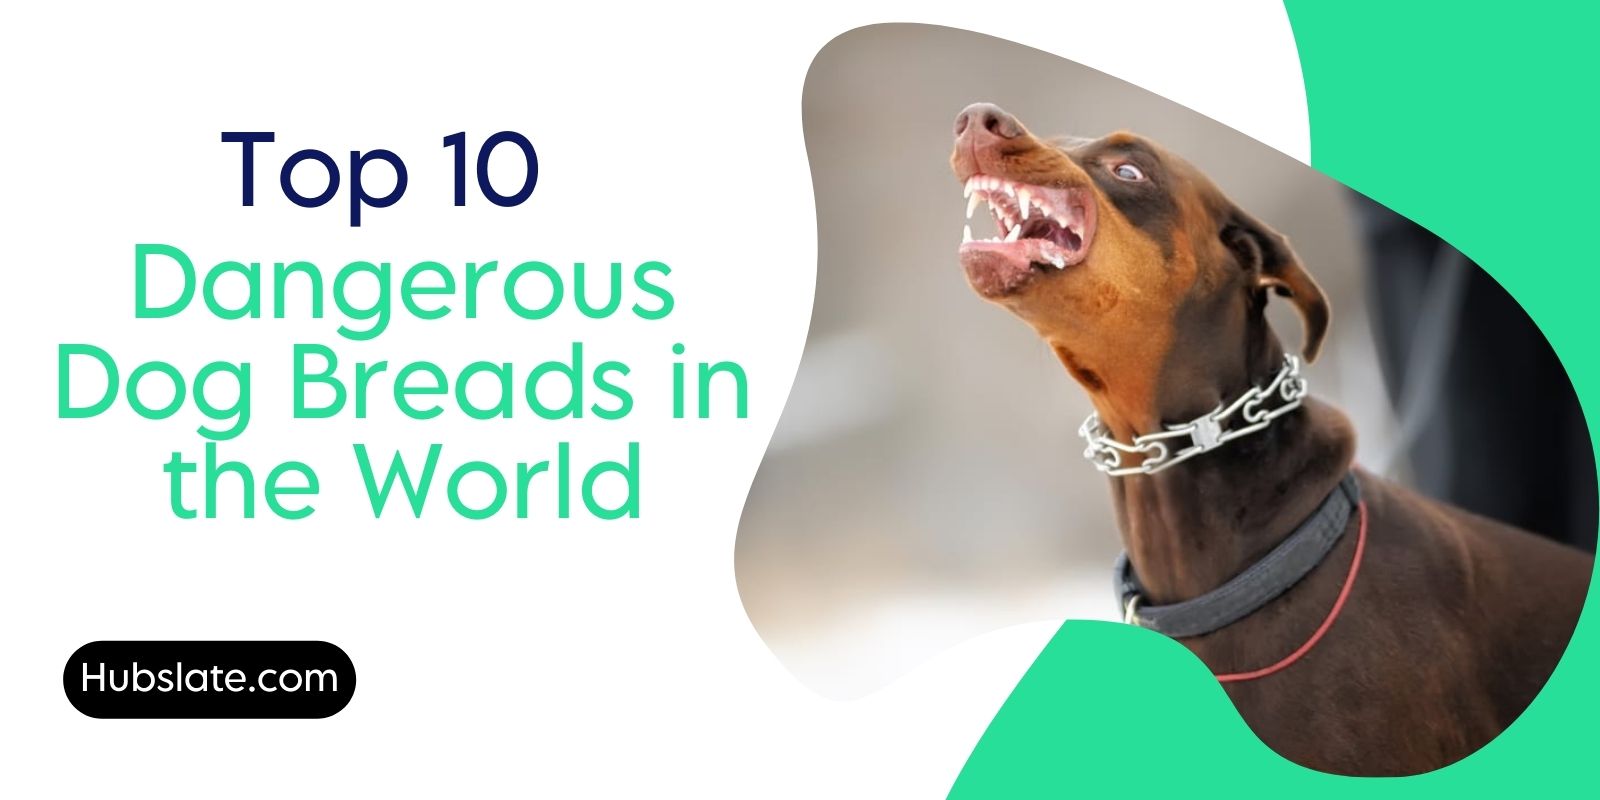 Dangerous Dog Breads in the World